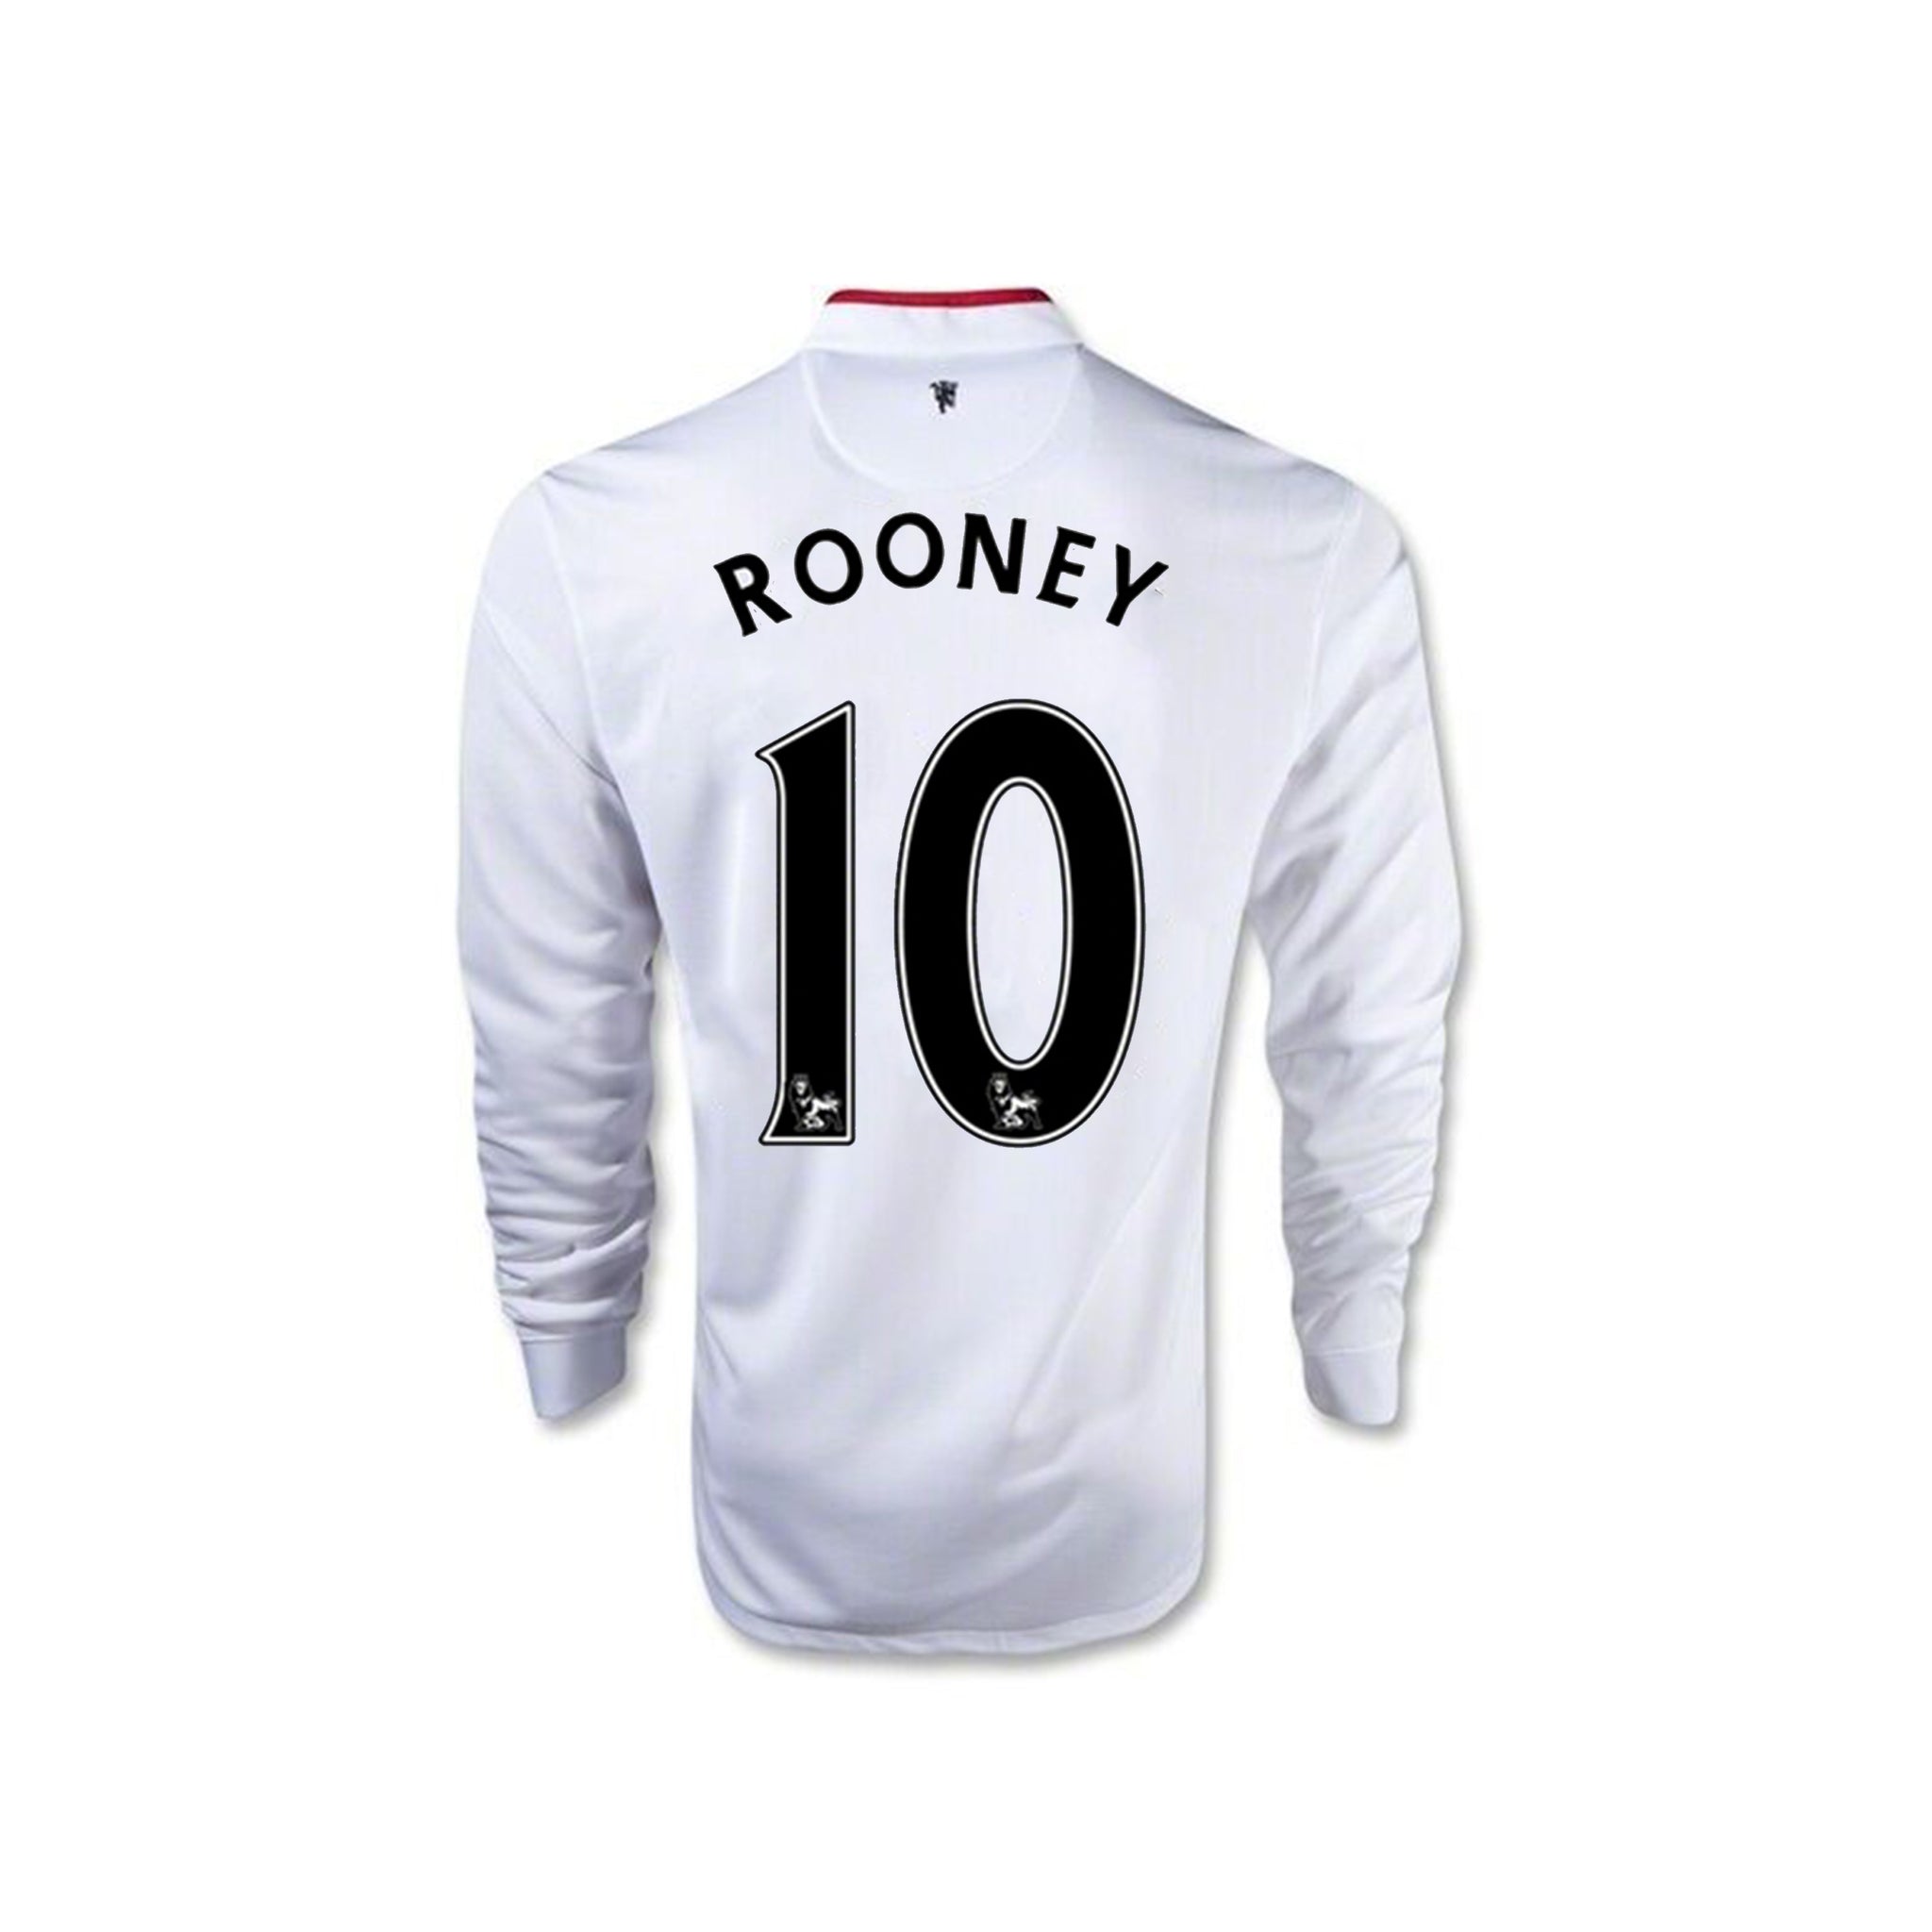 NIKE Manchester United FC Away (LS) ROONEY 12/13